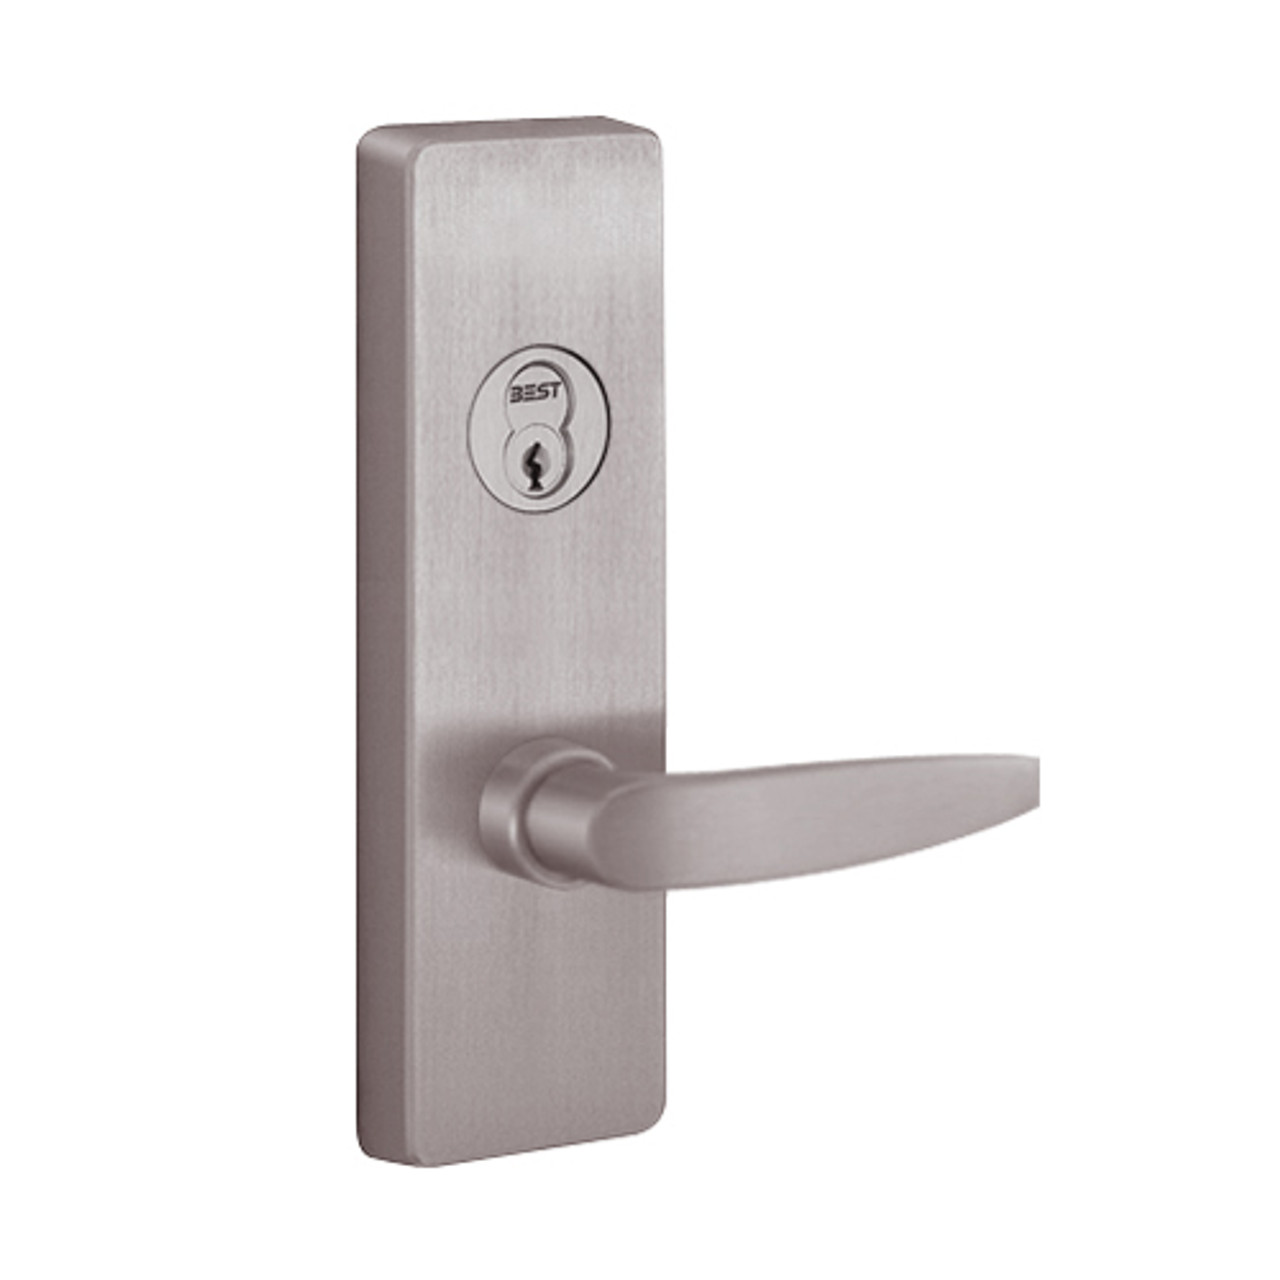 4908B-630-LHR PHI Key Controls Lever Trim with B Lever Design for Apex and Olympian Series Exit Device in Satin Stainless Steel Finish